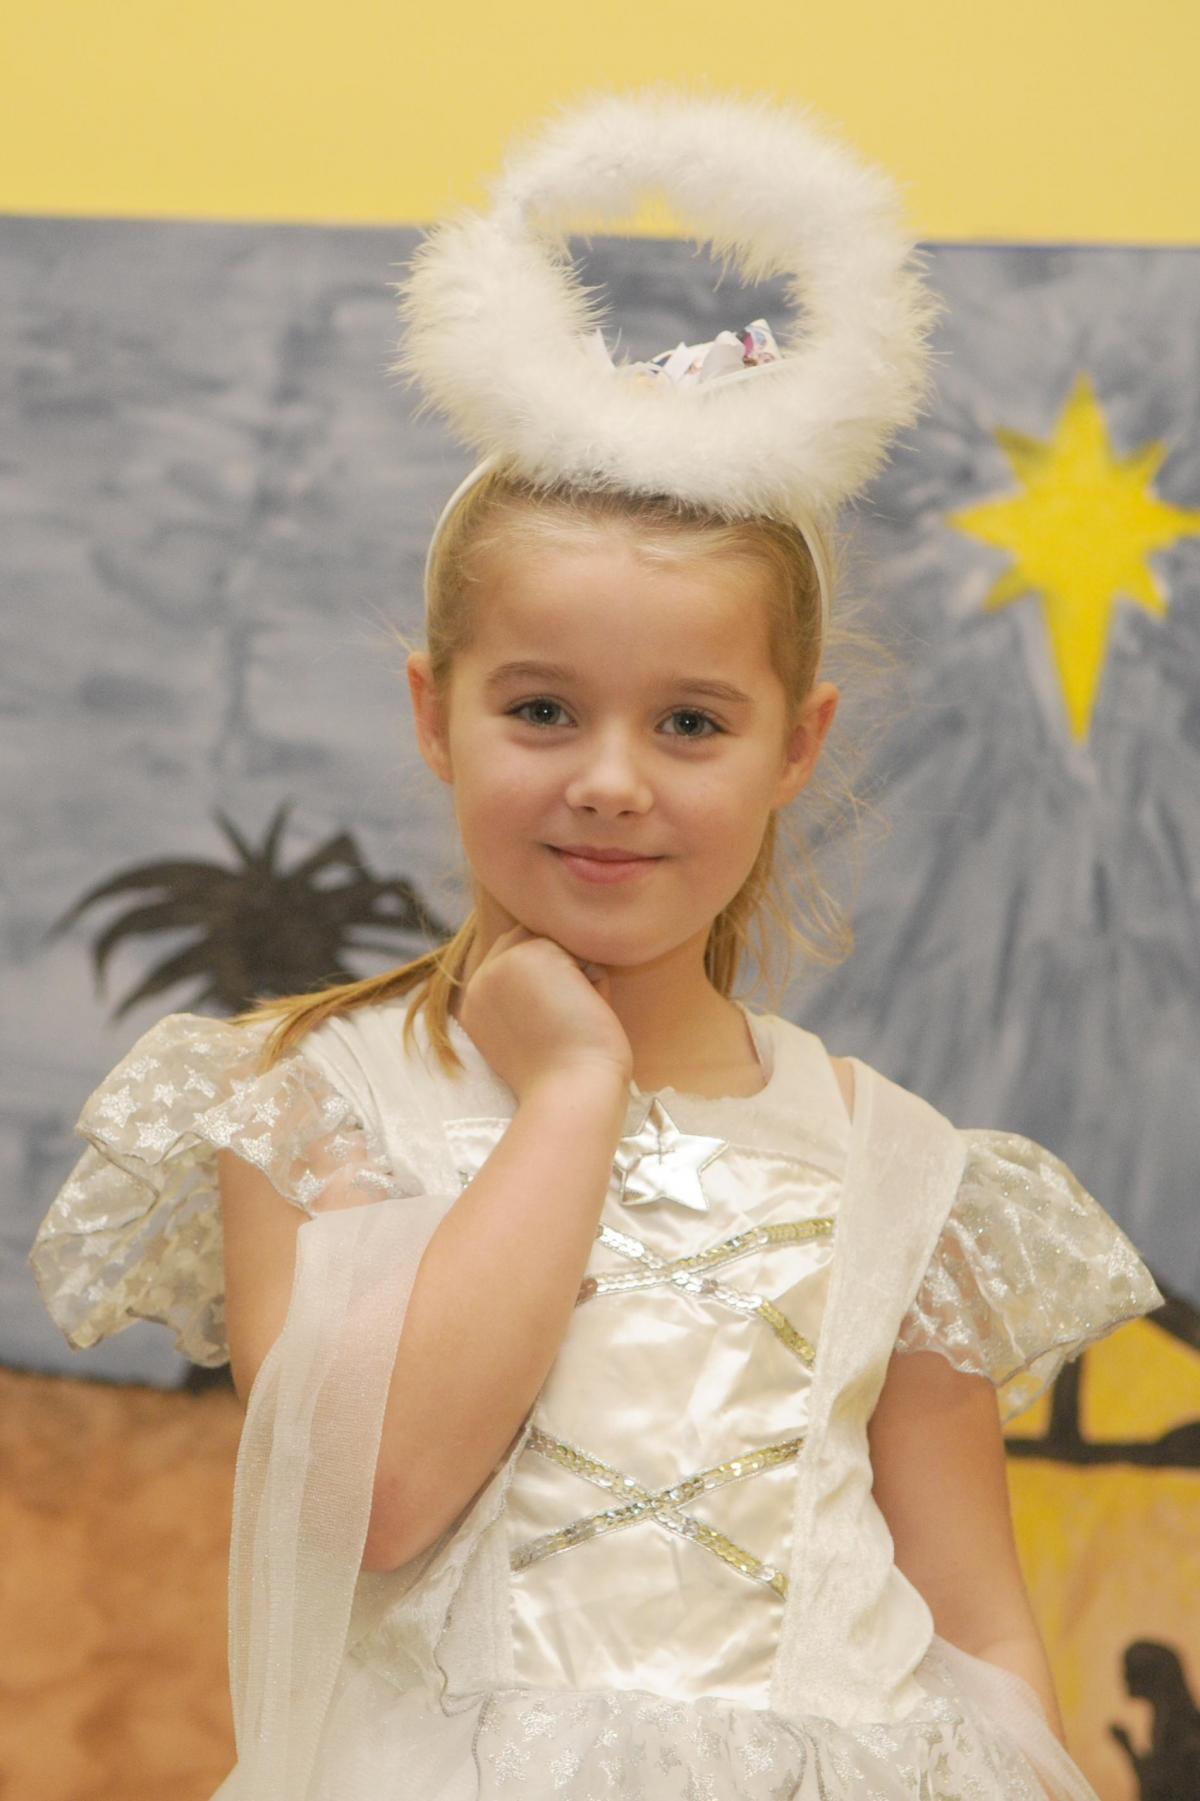 Nativity 2014 - Redlands Primary - click the 'buy this photo' button for alternative shots.